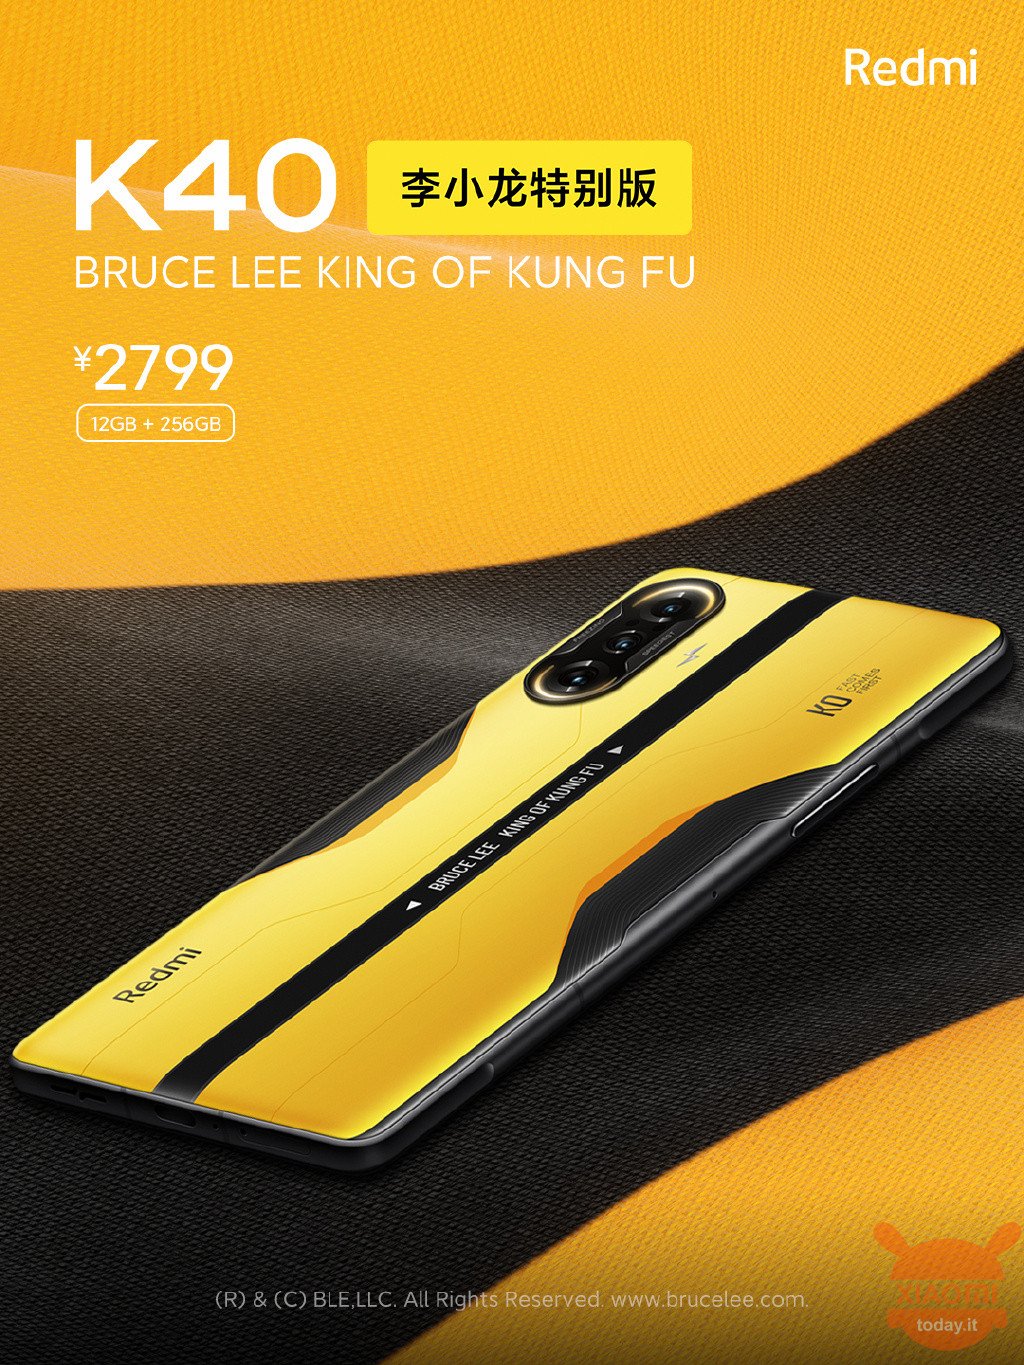 Redmi K40 Gaming Bruce Lee Edition